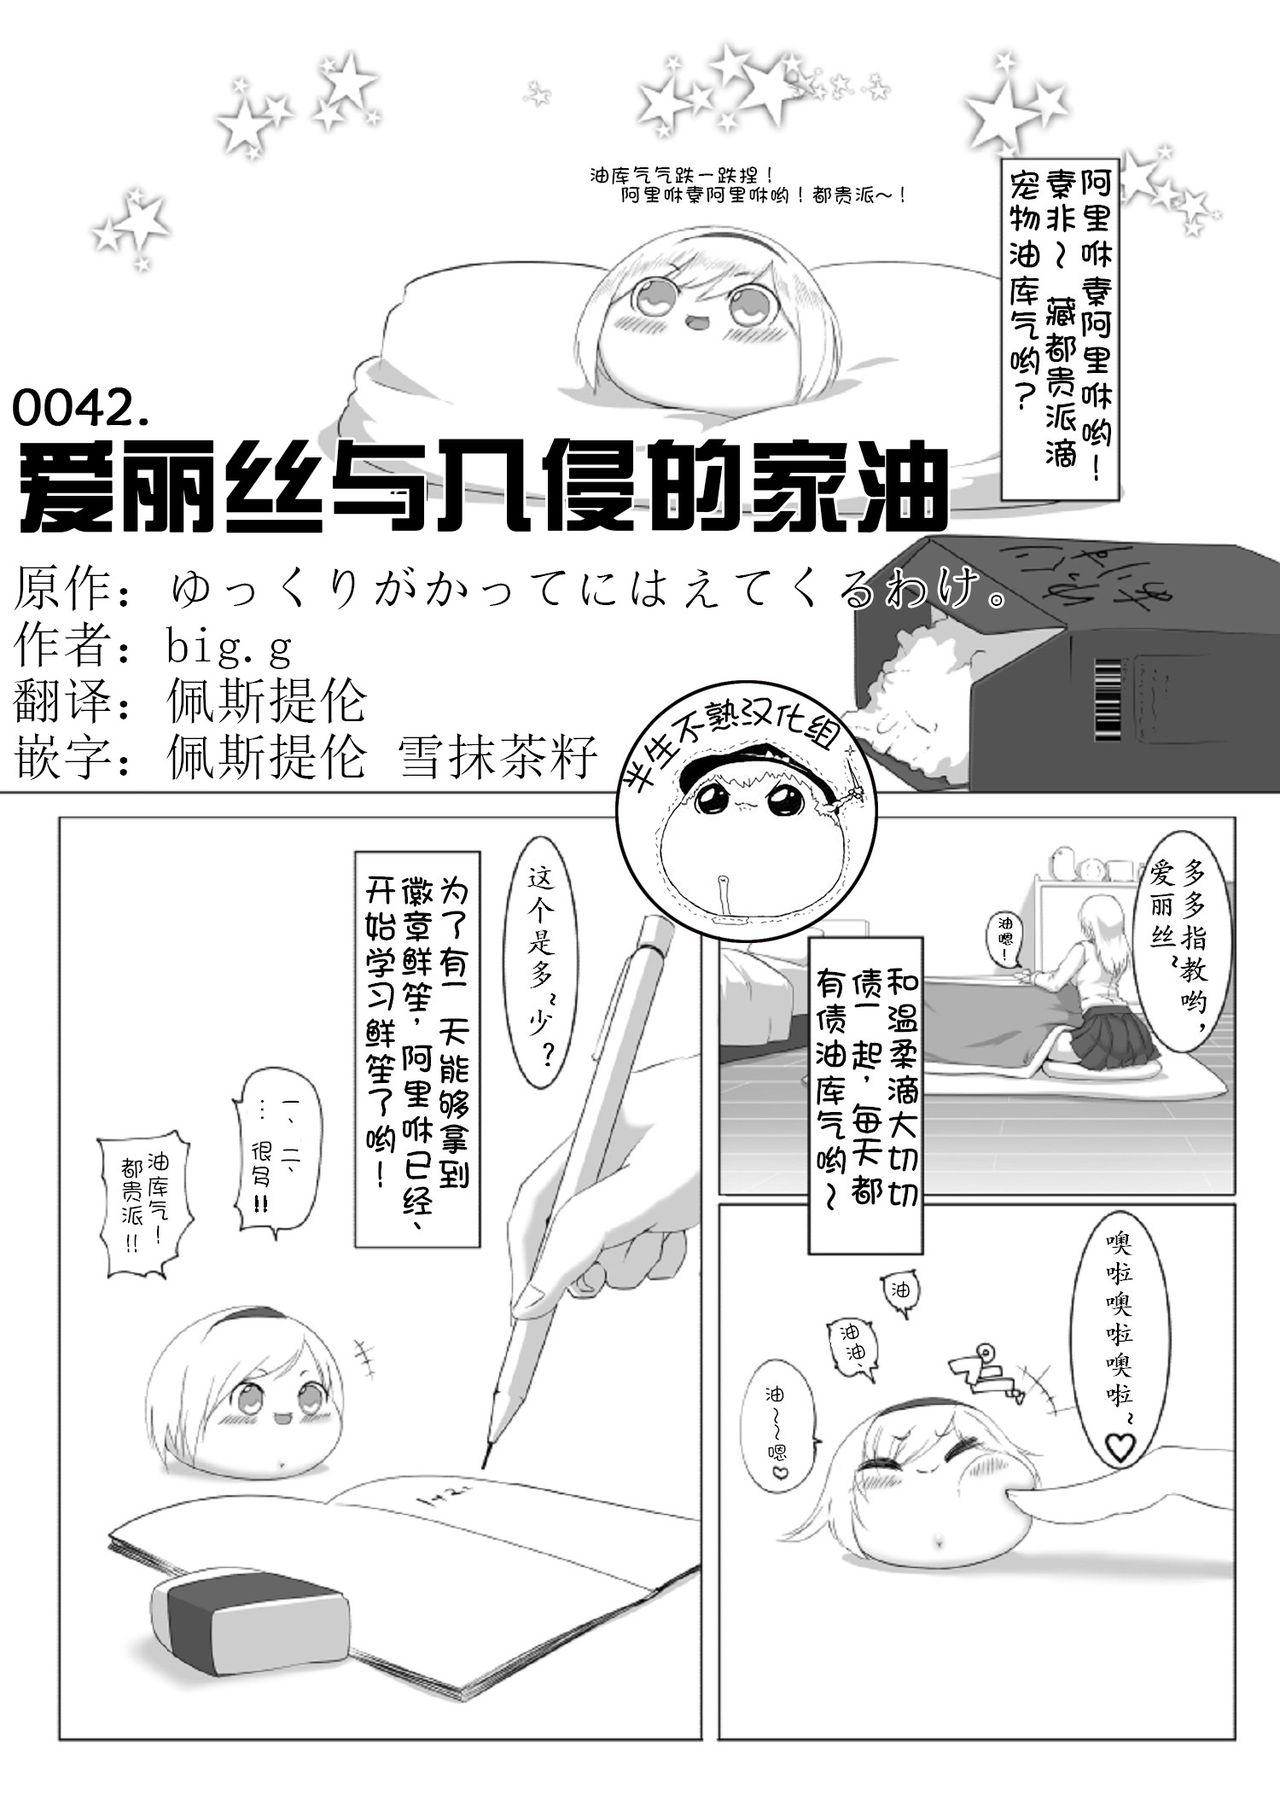 Blowjob ゆっくりがかってにはえてくるわけ（Chinese) - Touhou project Huge Boobs - Page 1